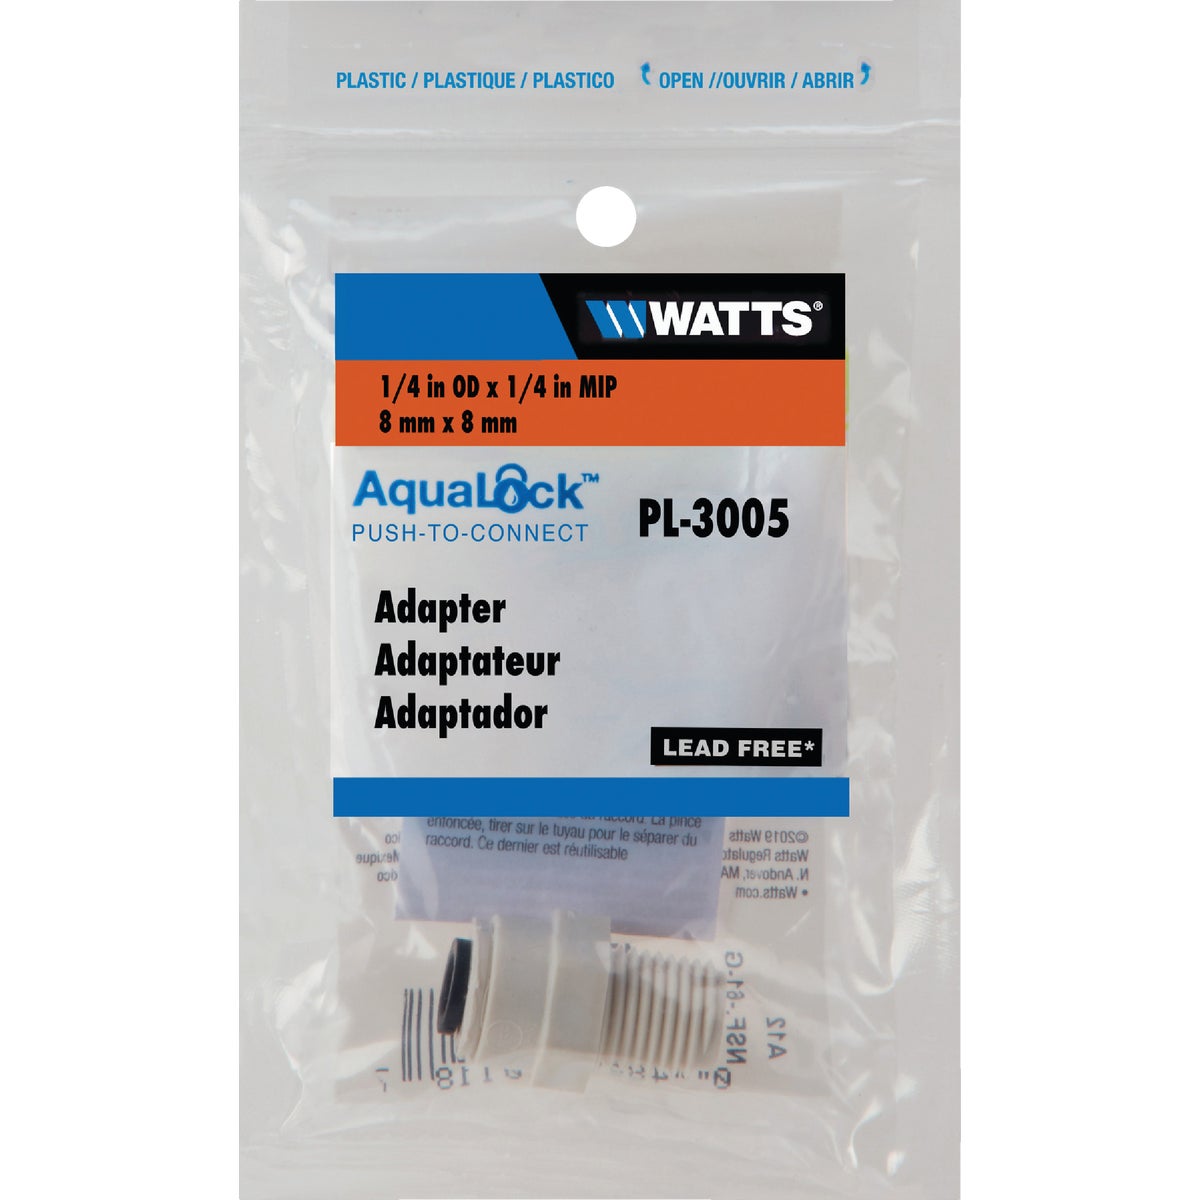 Watts Aqualock 1/4 In. OD x 1/4 In. MPT Push-to-Connect Plastic Adapter